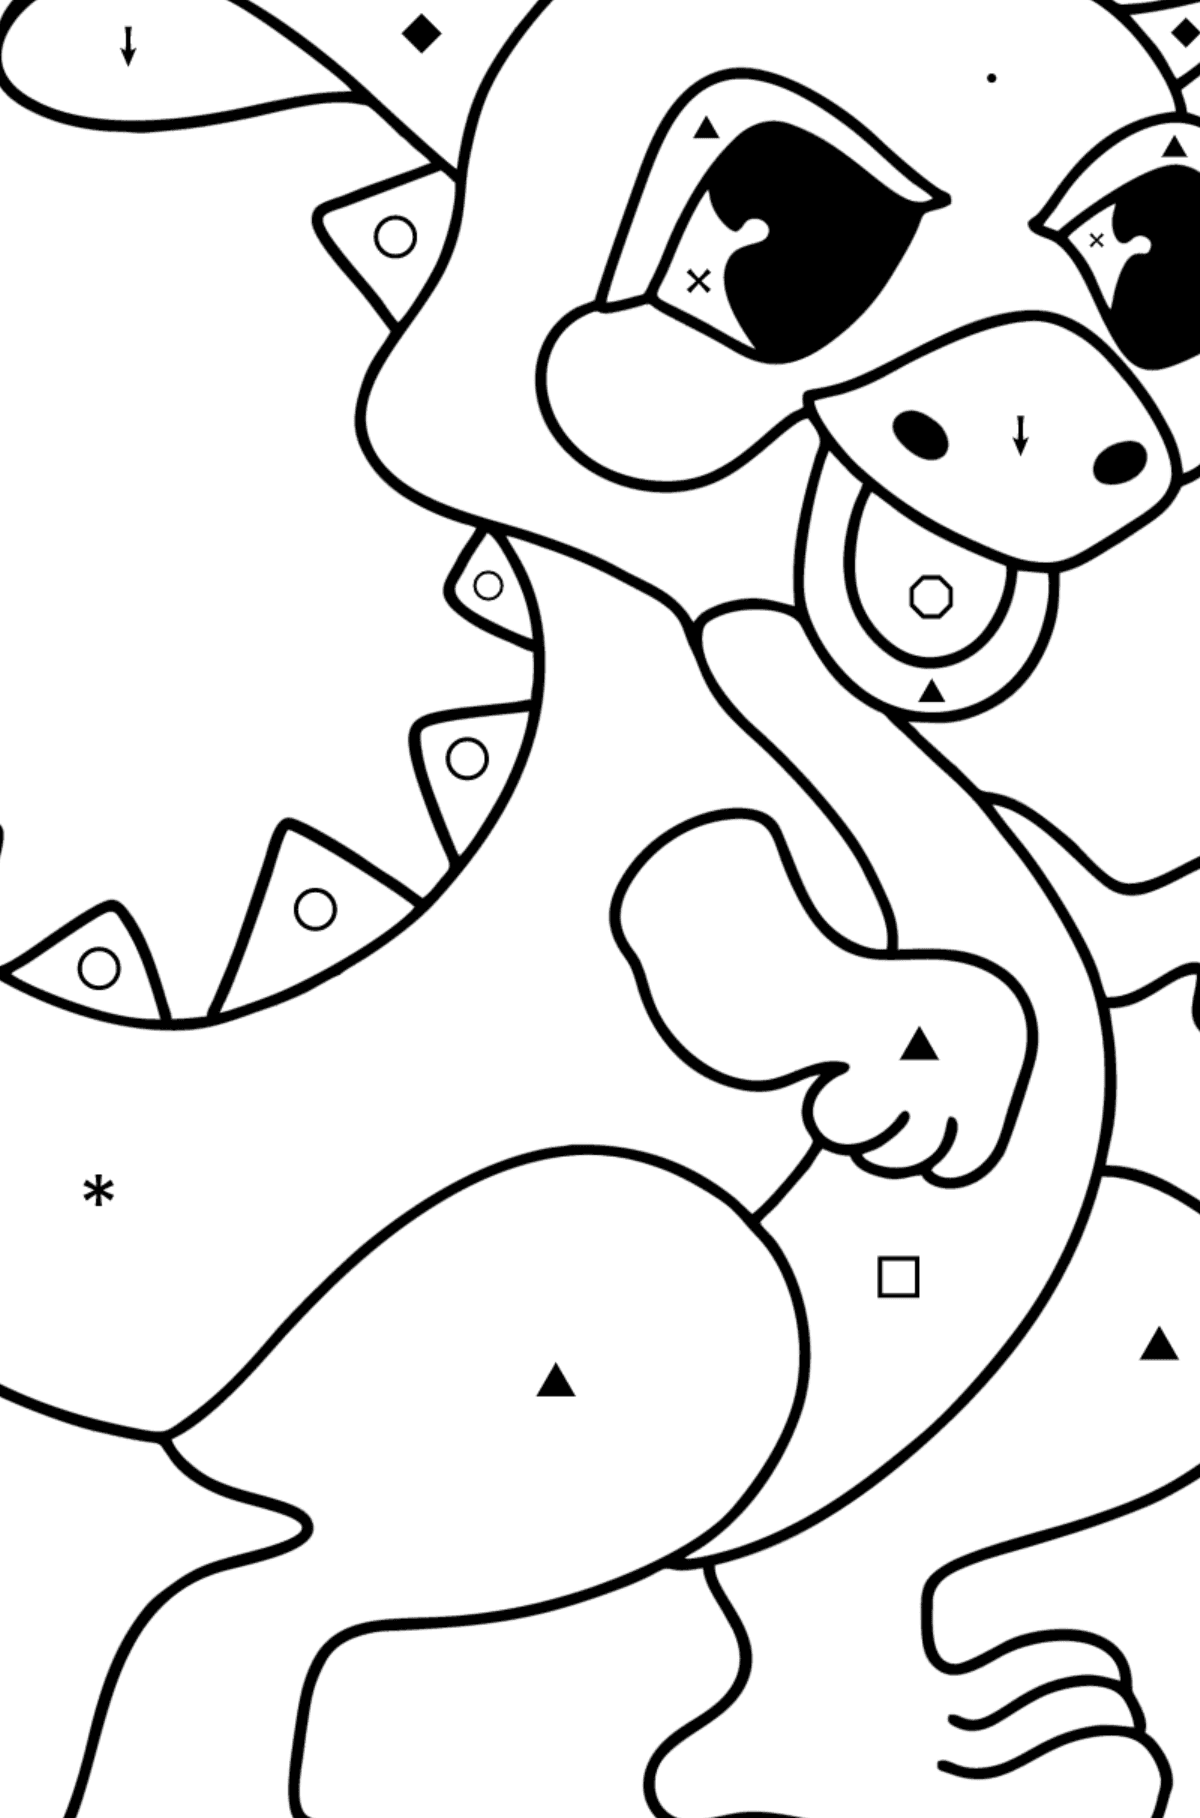 Cartoon dragon coloring page - Coloring by Symbols and Geometric Shapes for Kids